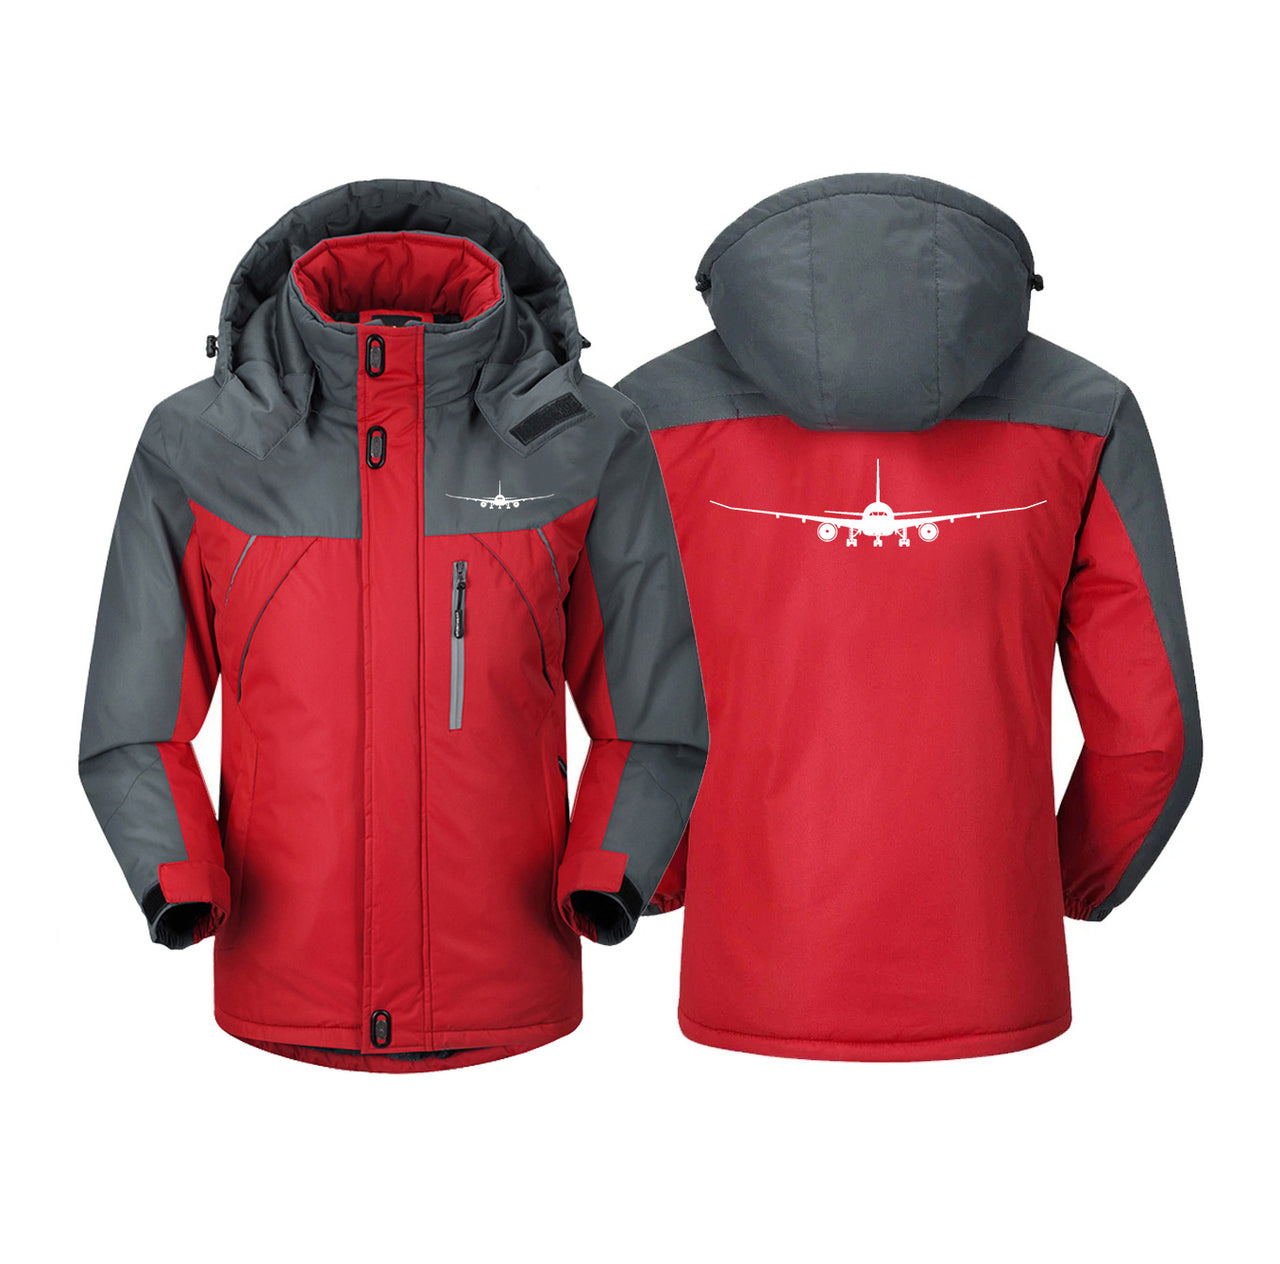 Boeing 787 Silhouette Designed Thick Winter Jackets